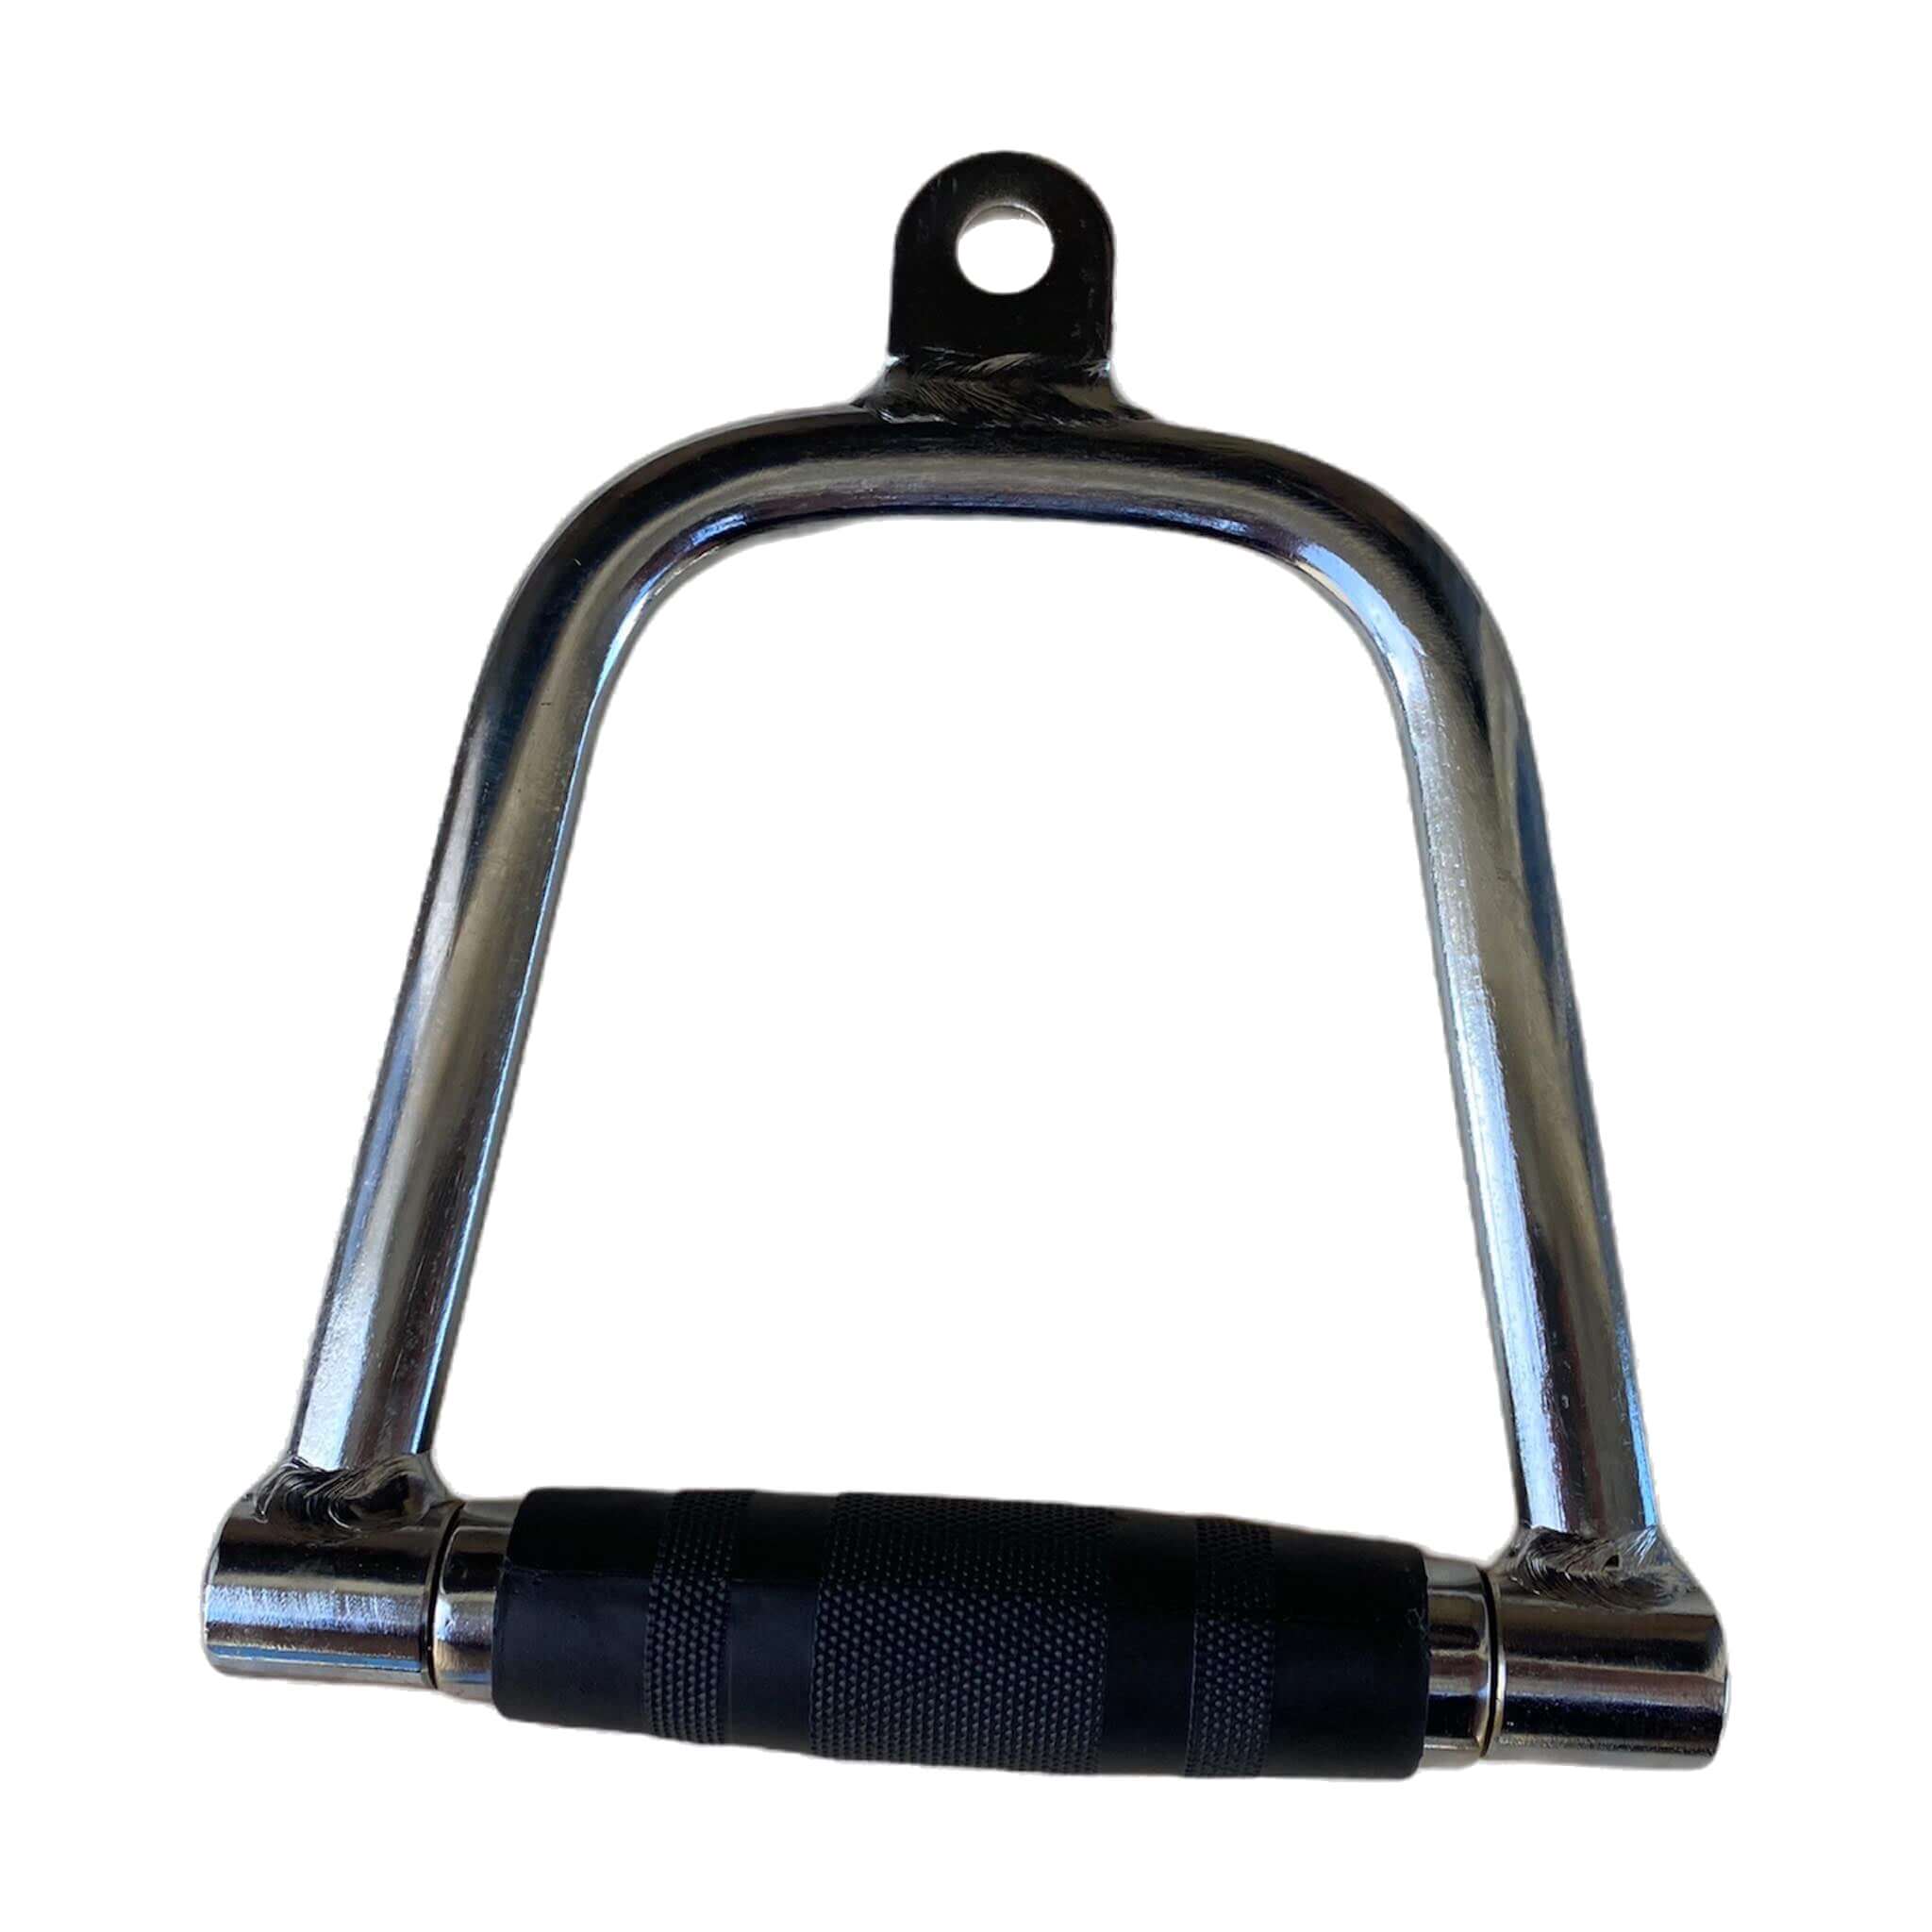 Stirrup D-Handle Cable Pulley Extension Attachments | INSOURCE